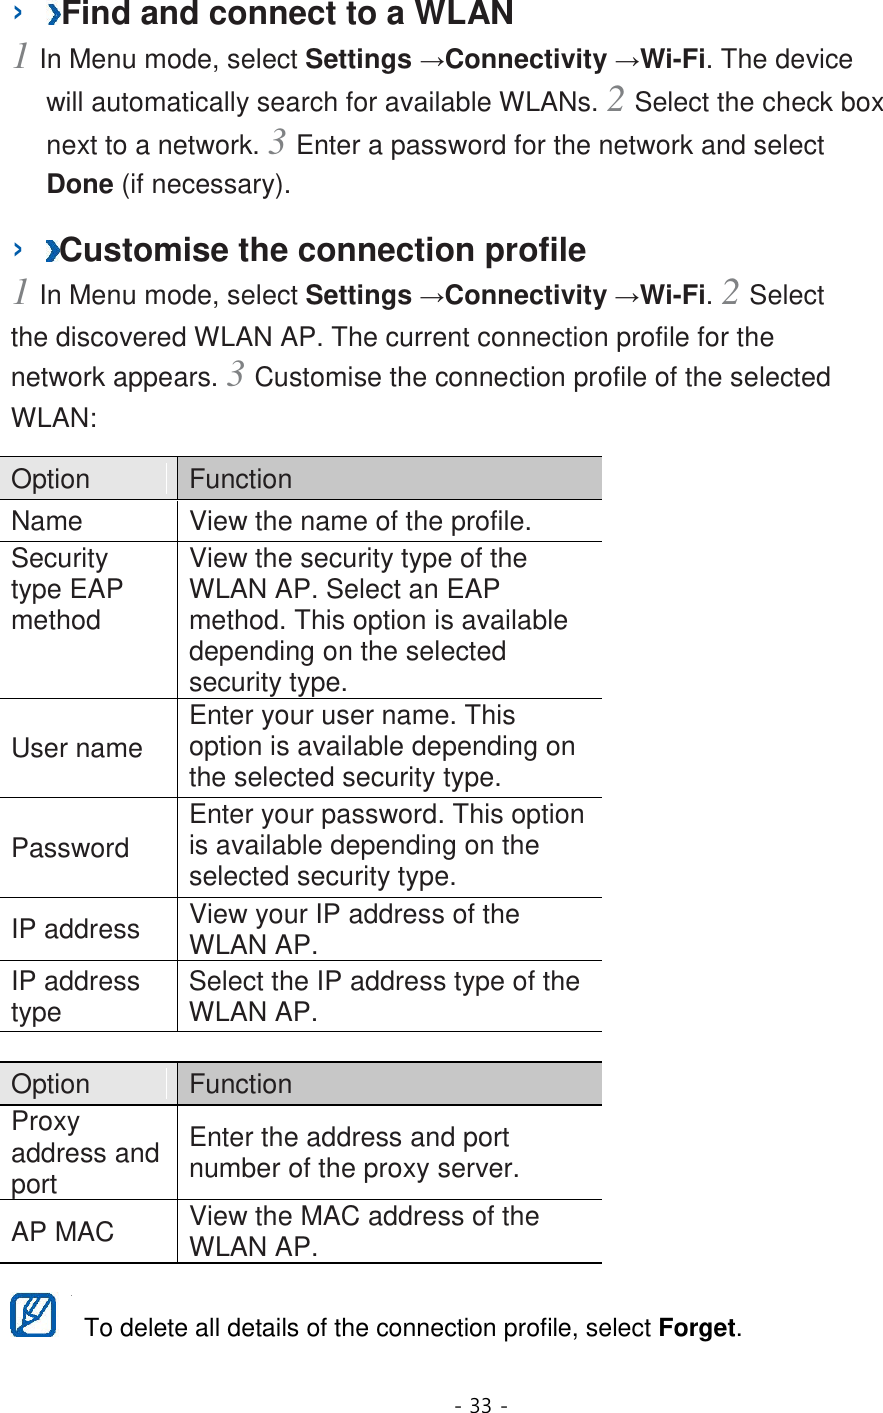 - 33 -  ›  Find and connect to a WLAN   1 In Menu mode, select Settings →Connectivity →Wi-Fi. The device will automatically search for available WLANs. 2 Select the check box next to a network. 3 Enter a password for the network and select Done (if necessary).   ›  Customise the connection profile   1 In Menu mode, select Settings →Connectivity →Wi-Fi. 2 Select the discovered WLAN AP. The current connection profile for the network appears. 3 Customise the connection profile of the selected WLAN:   Option    Function   Name   View the name of the profile.   Security type EAP method   View the security type of the WLAN AP. Select an EAP method. This option is available depending on the selected security type.   User name   Enter your user name. This option is available depending on the selected security type.   Password   Enter your password. This option is available depending on the selected security type.   IP address   View your IP address of the WLAN AP.   IP address type   Select the IP address type of the WLAN AP.    Option    Function   Proxy address and port   Enter the address and port number of the proxy server.   AP MAC   View the MAC address of the WLAN AP.     To delete all details of the connection profile, select Forget.   